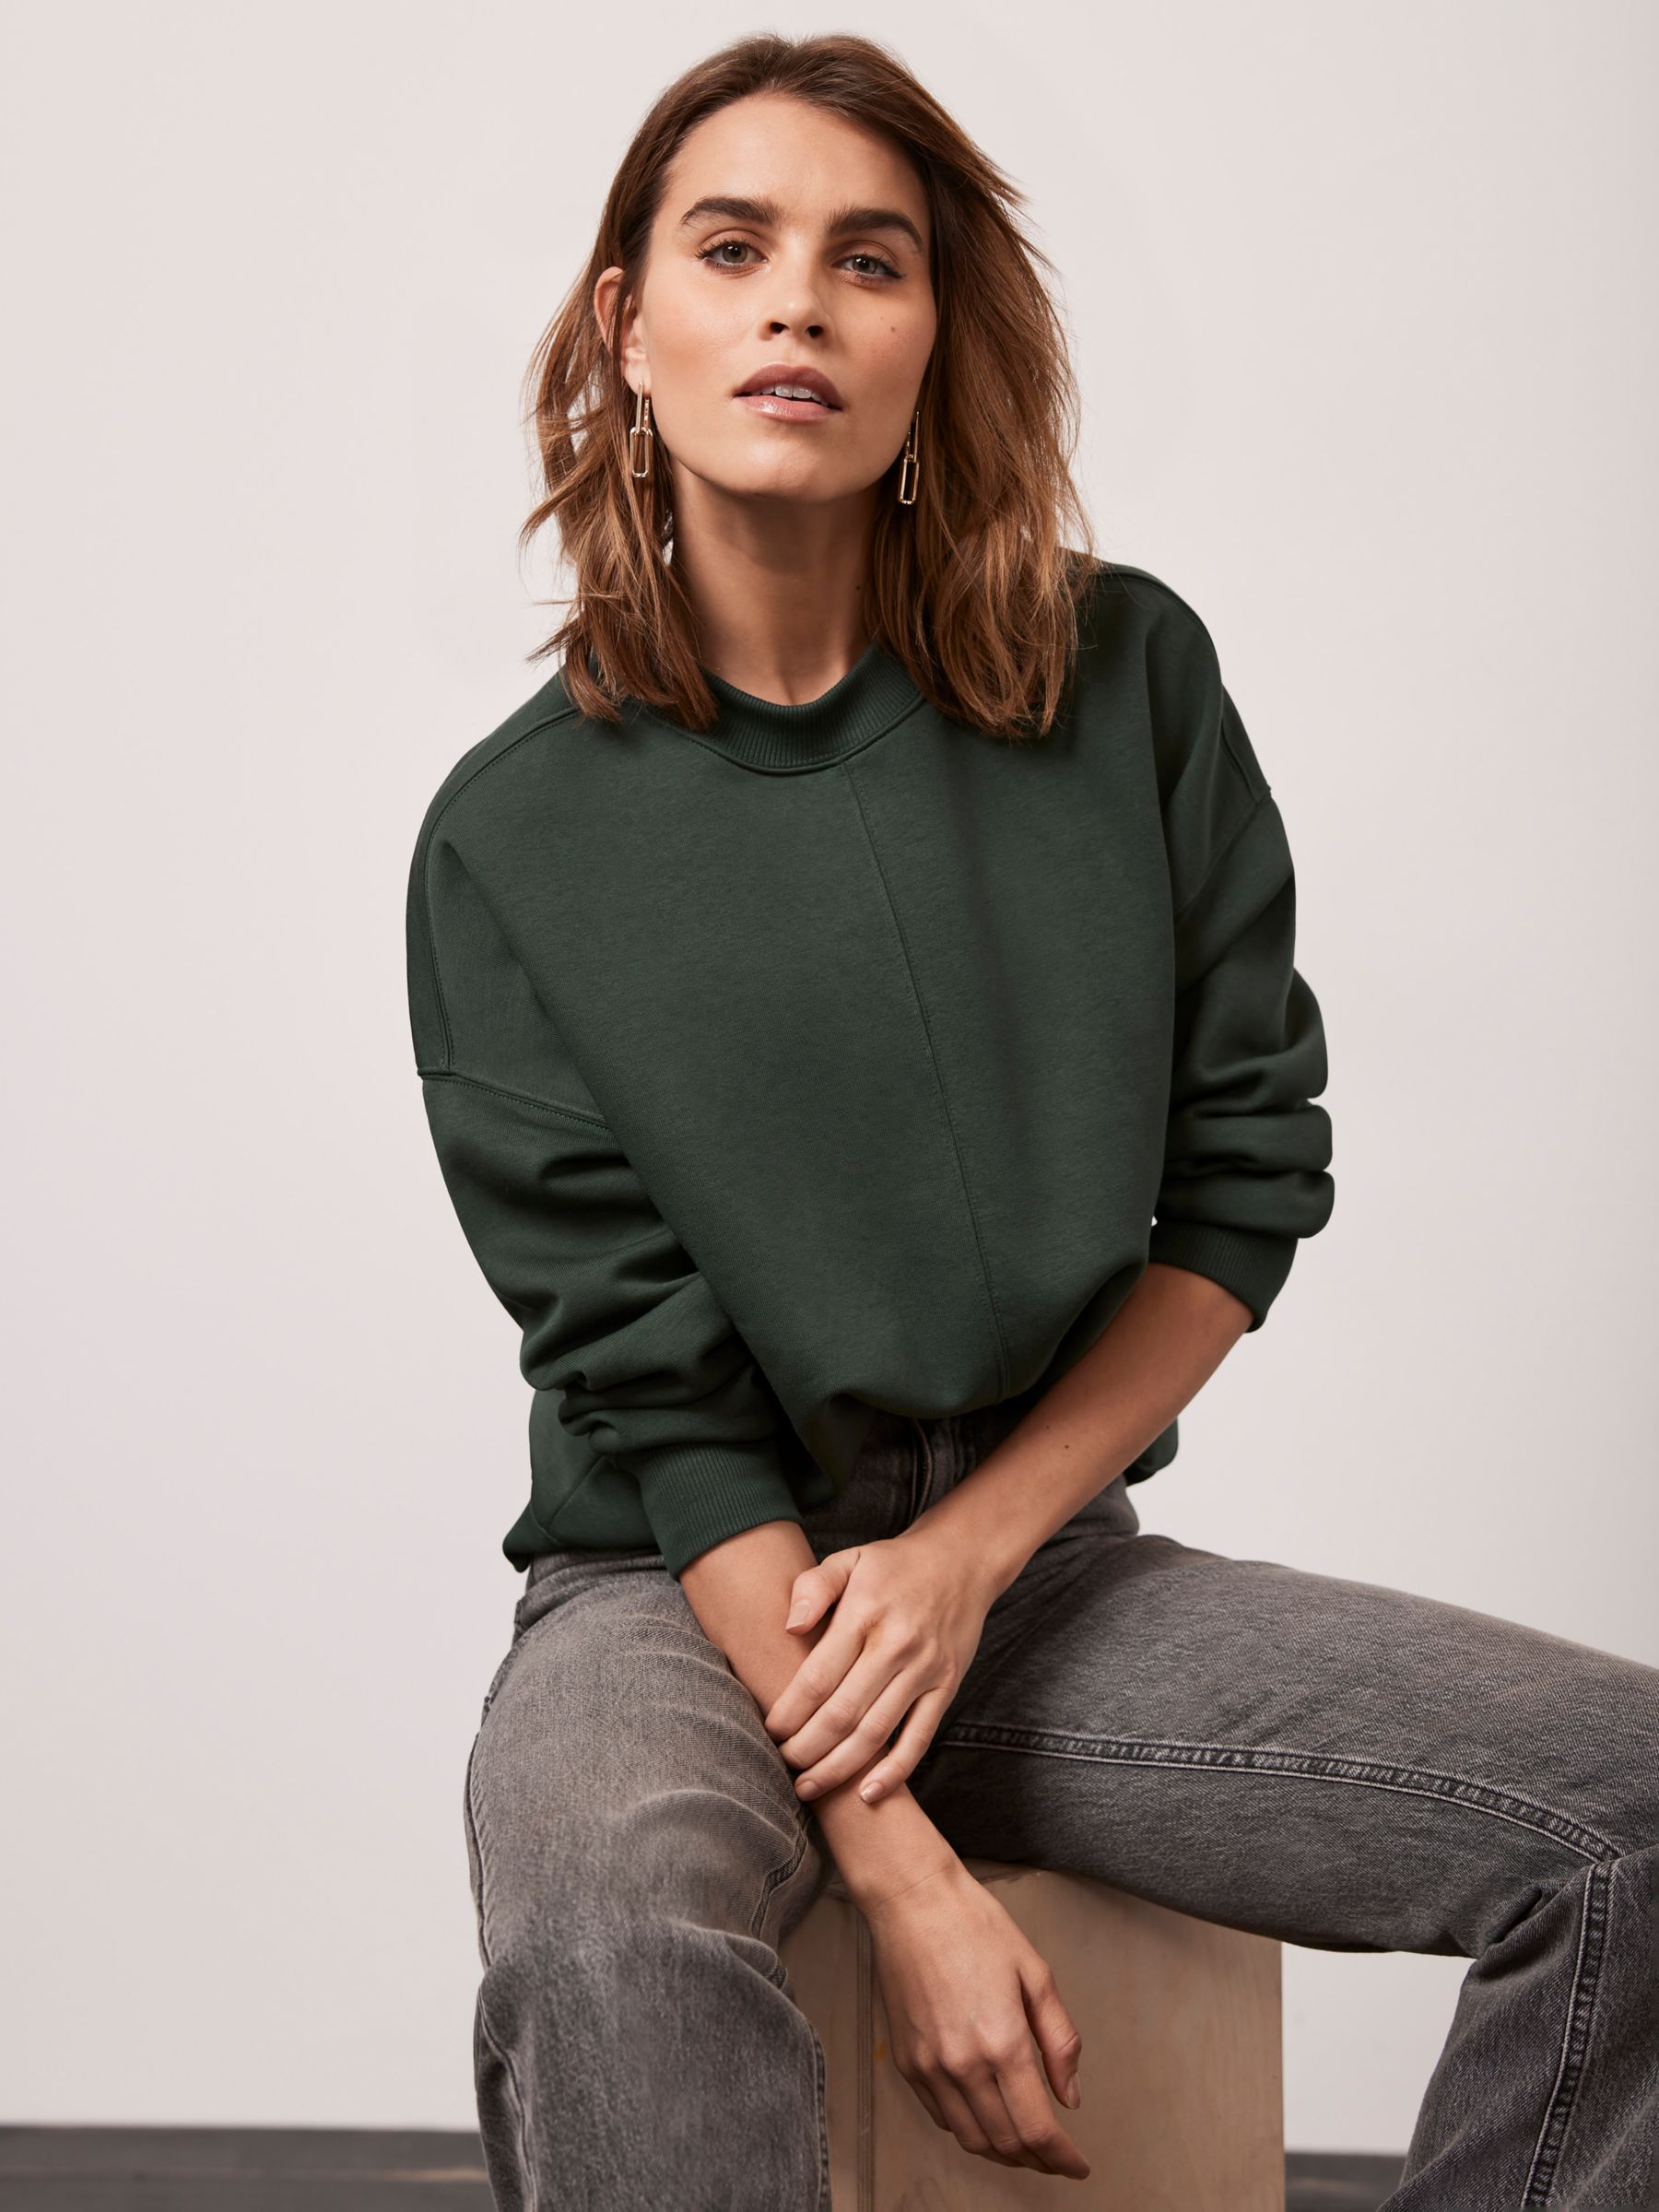 Shop Mint Velvet Women's Chunky Knit Jumpers up to 65% Off